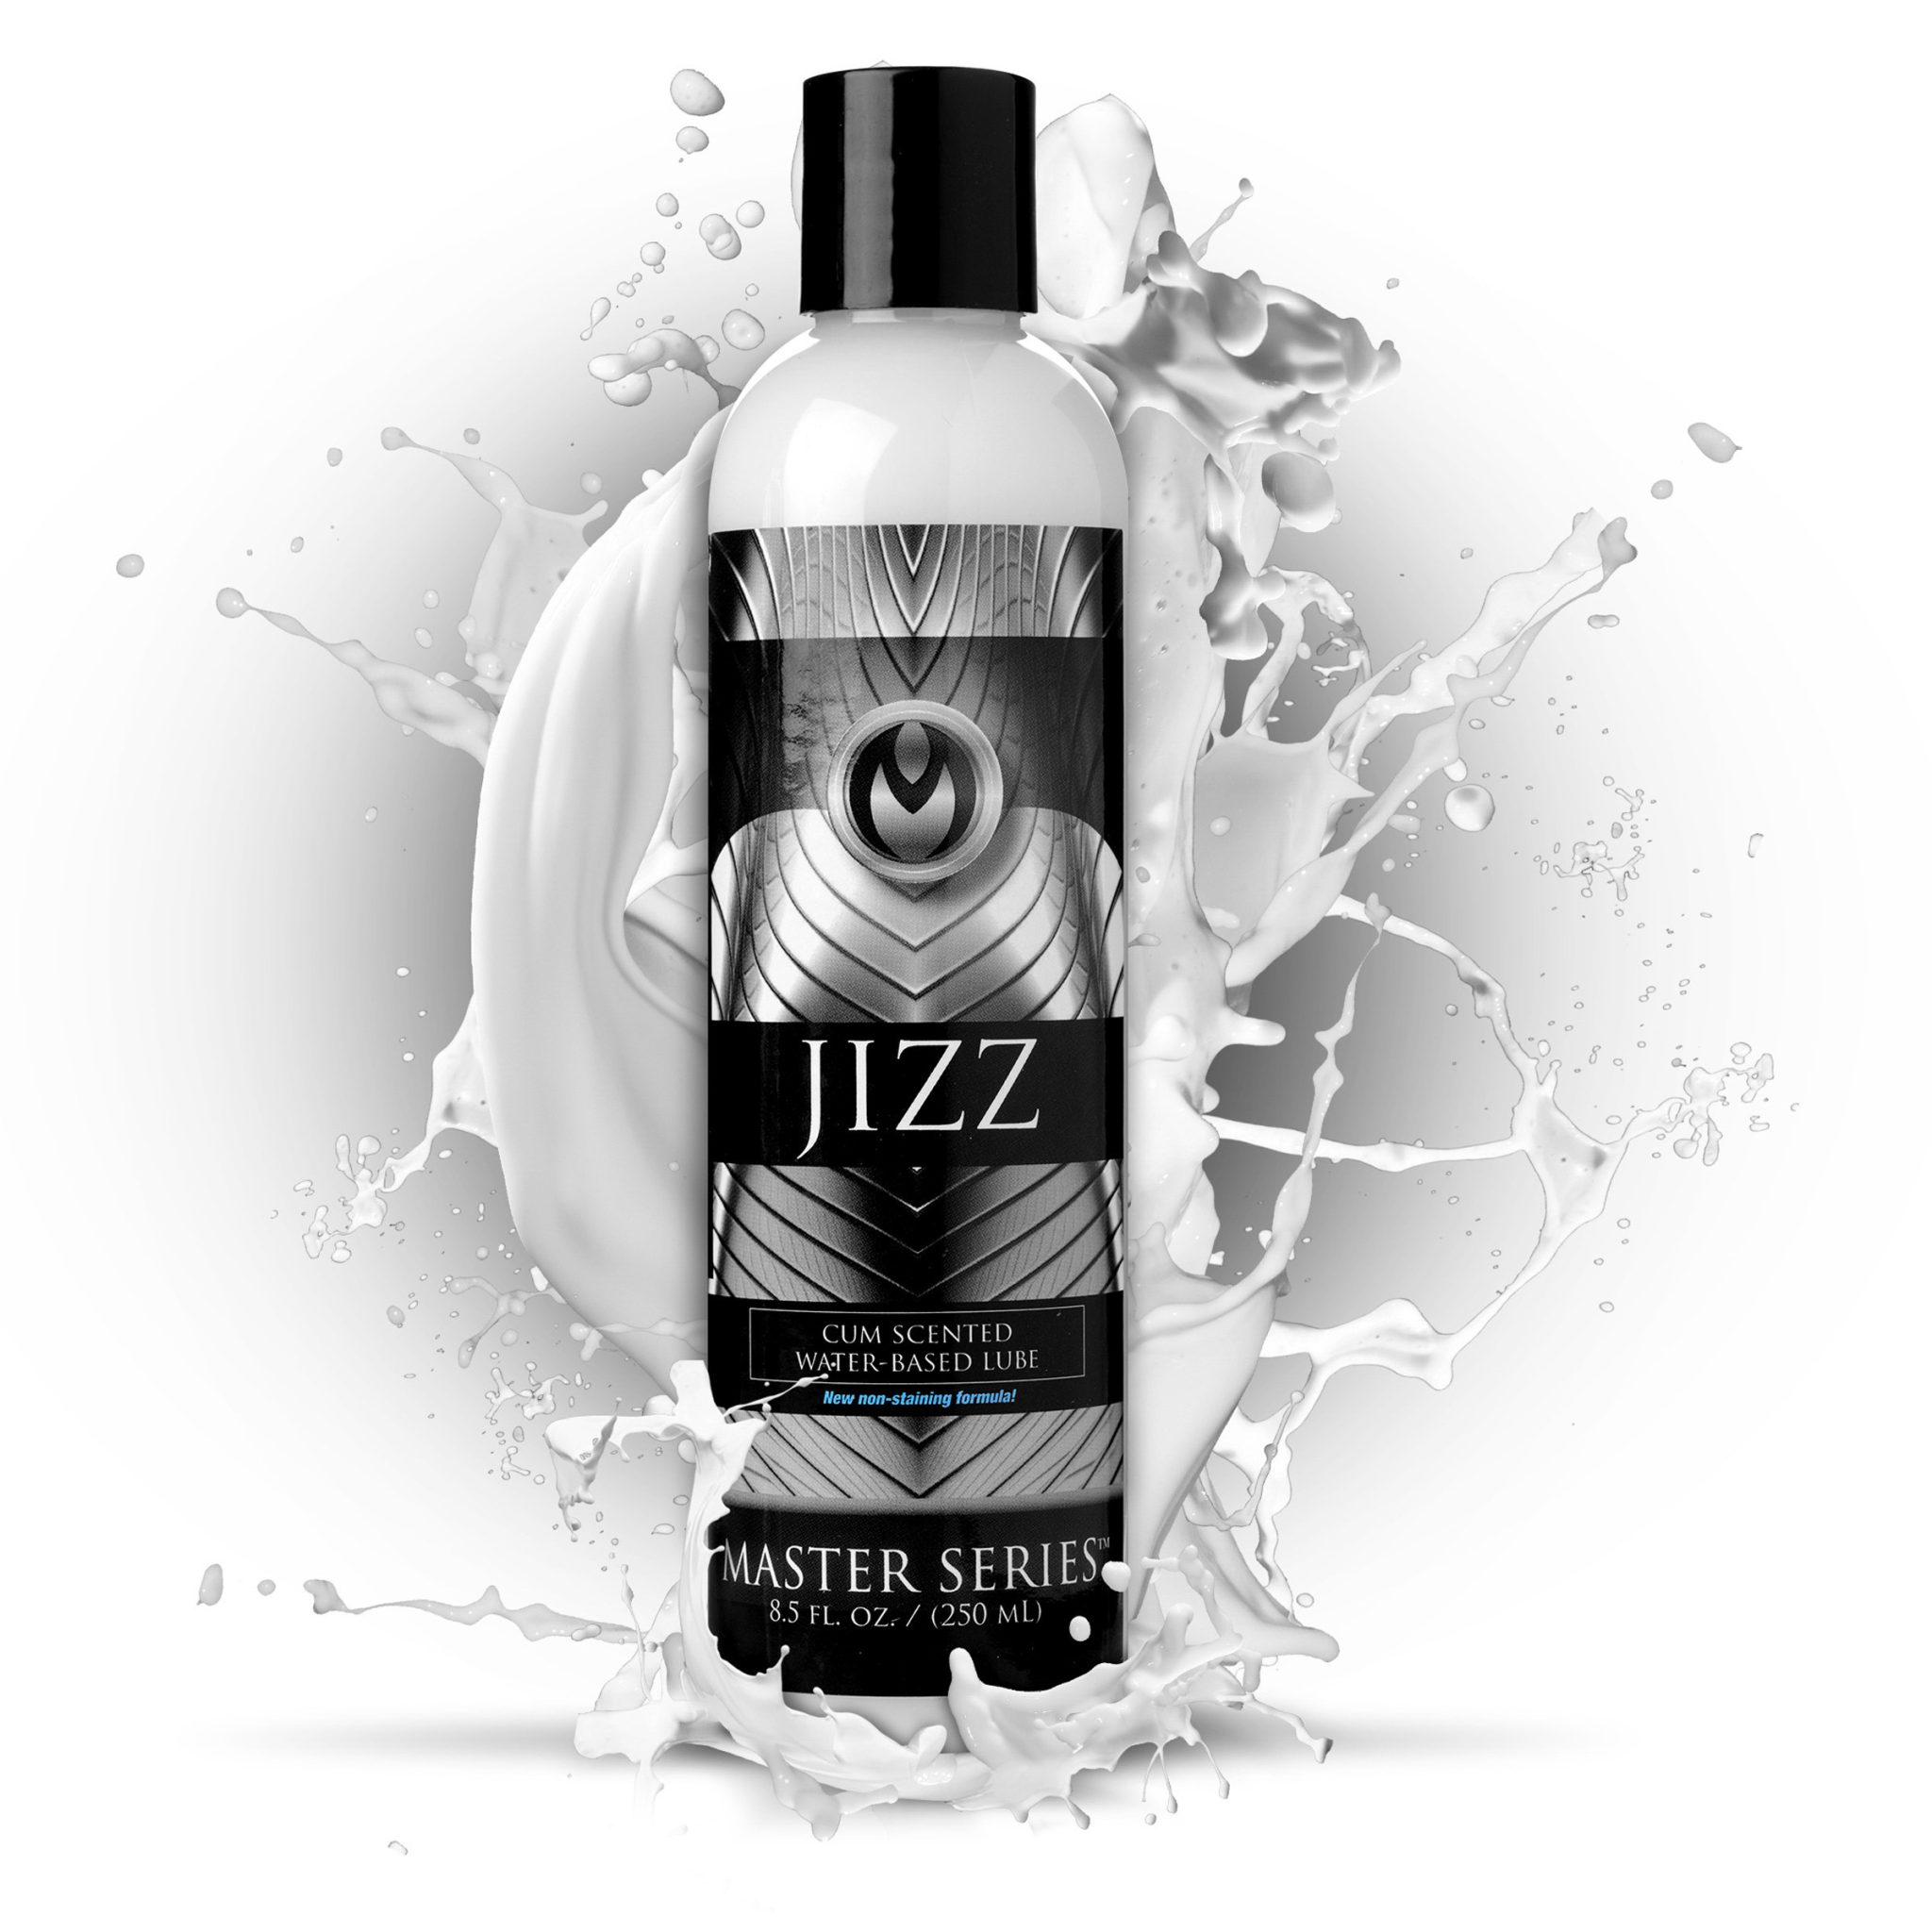 Jizz Water Based Cum Scented Lube – 8.5 oz